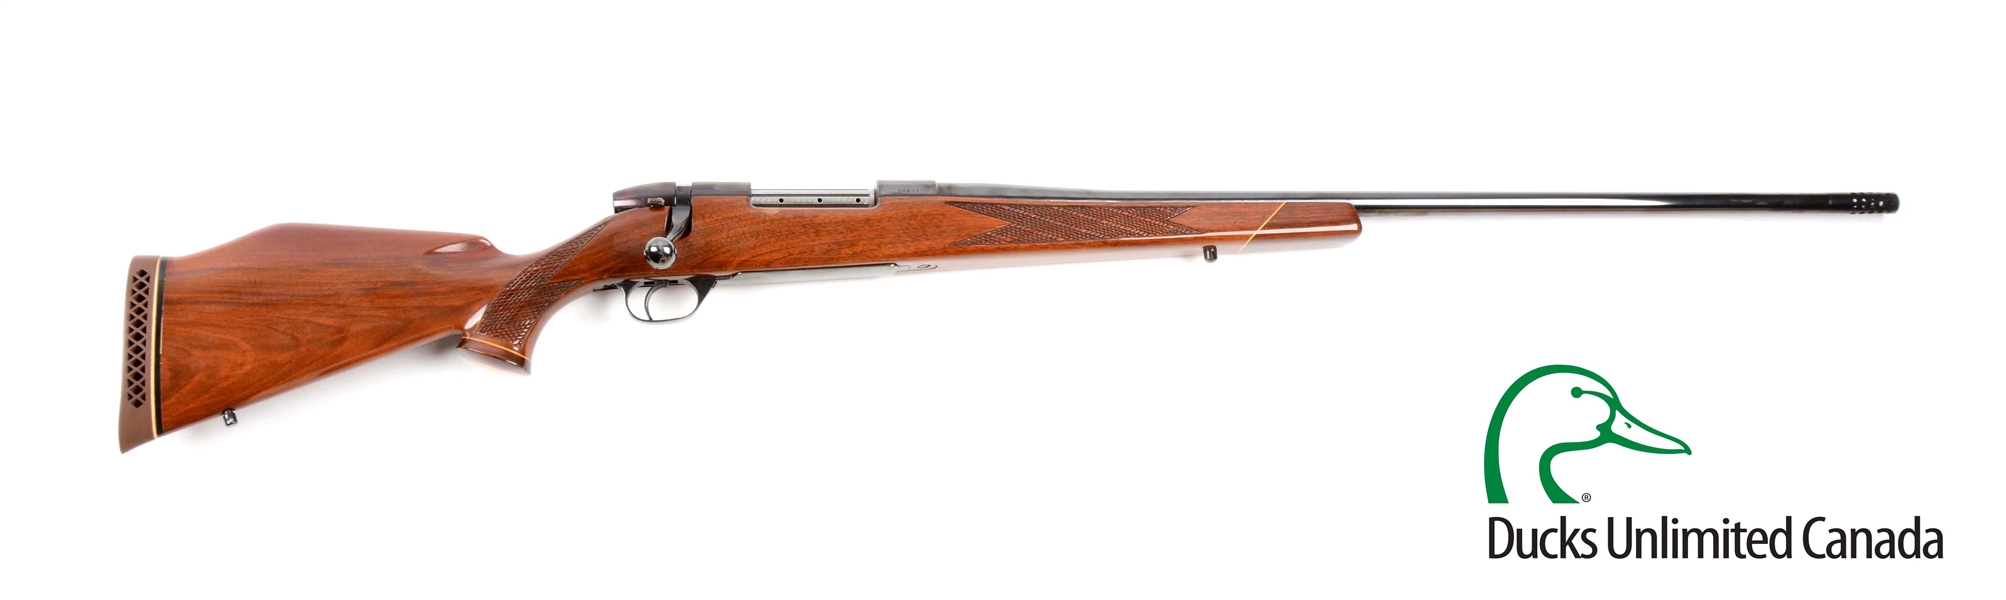 (M) EARLY J.P. SAUER WEATHERBY MK V DELUXE RIFLE.